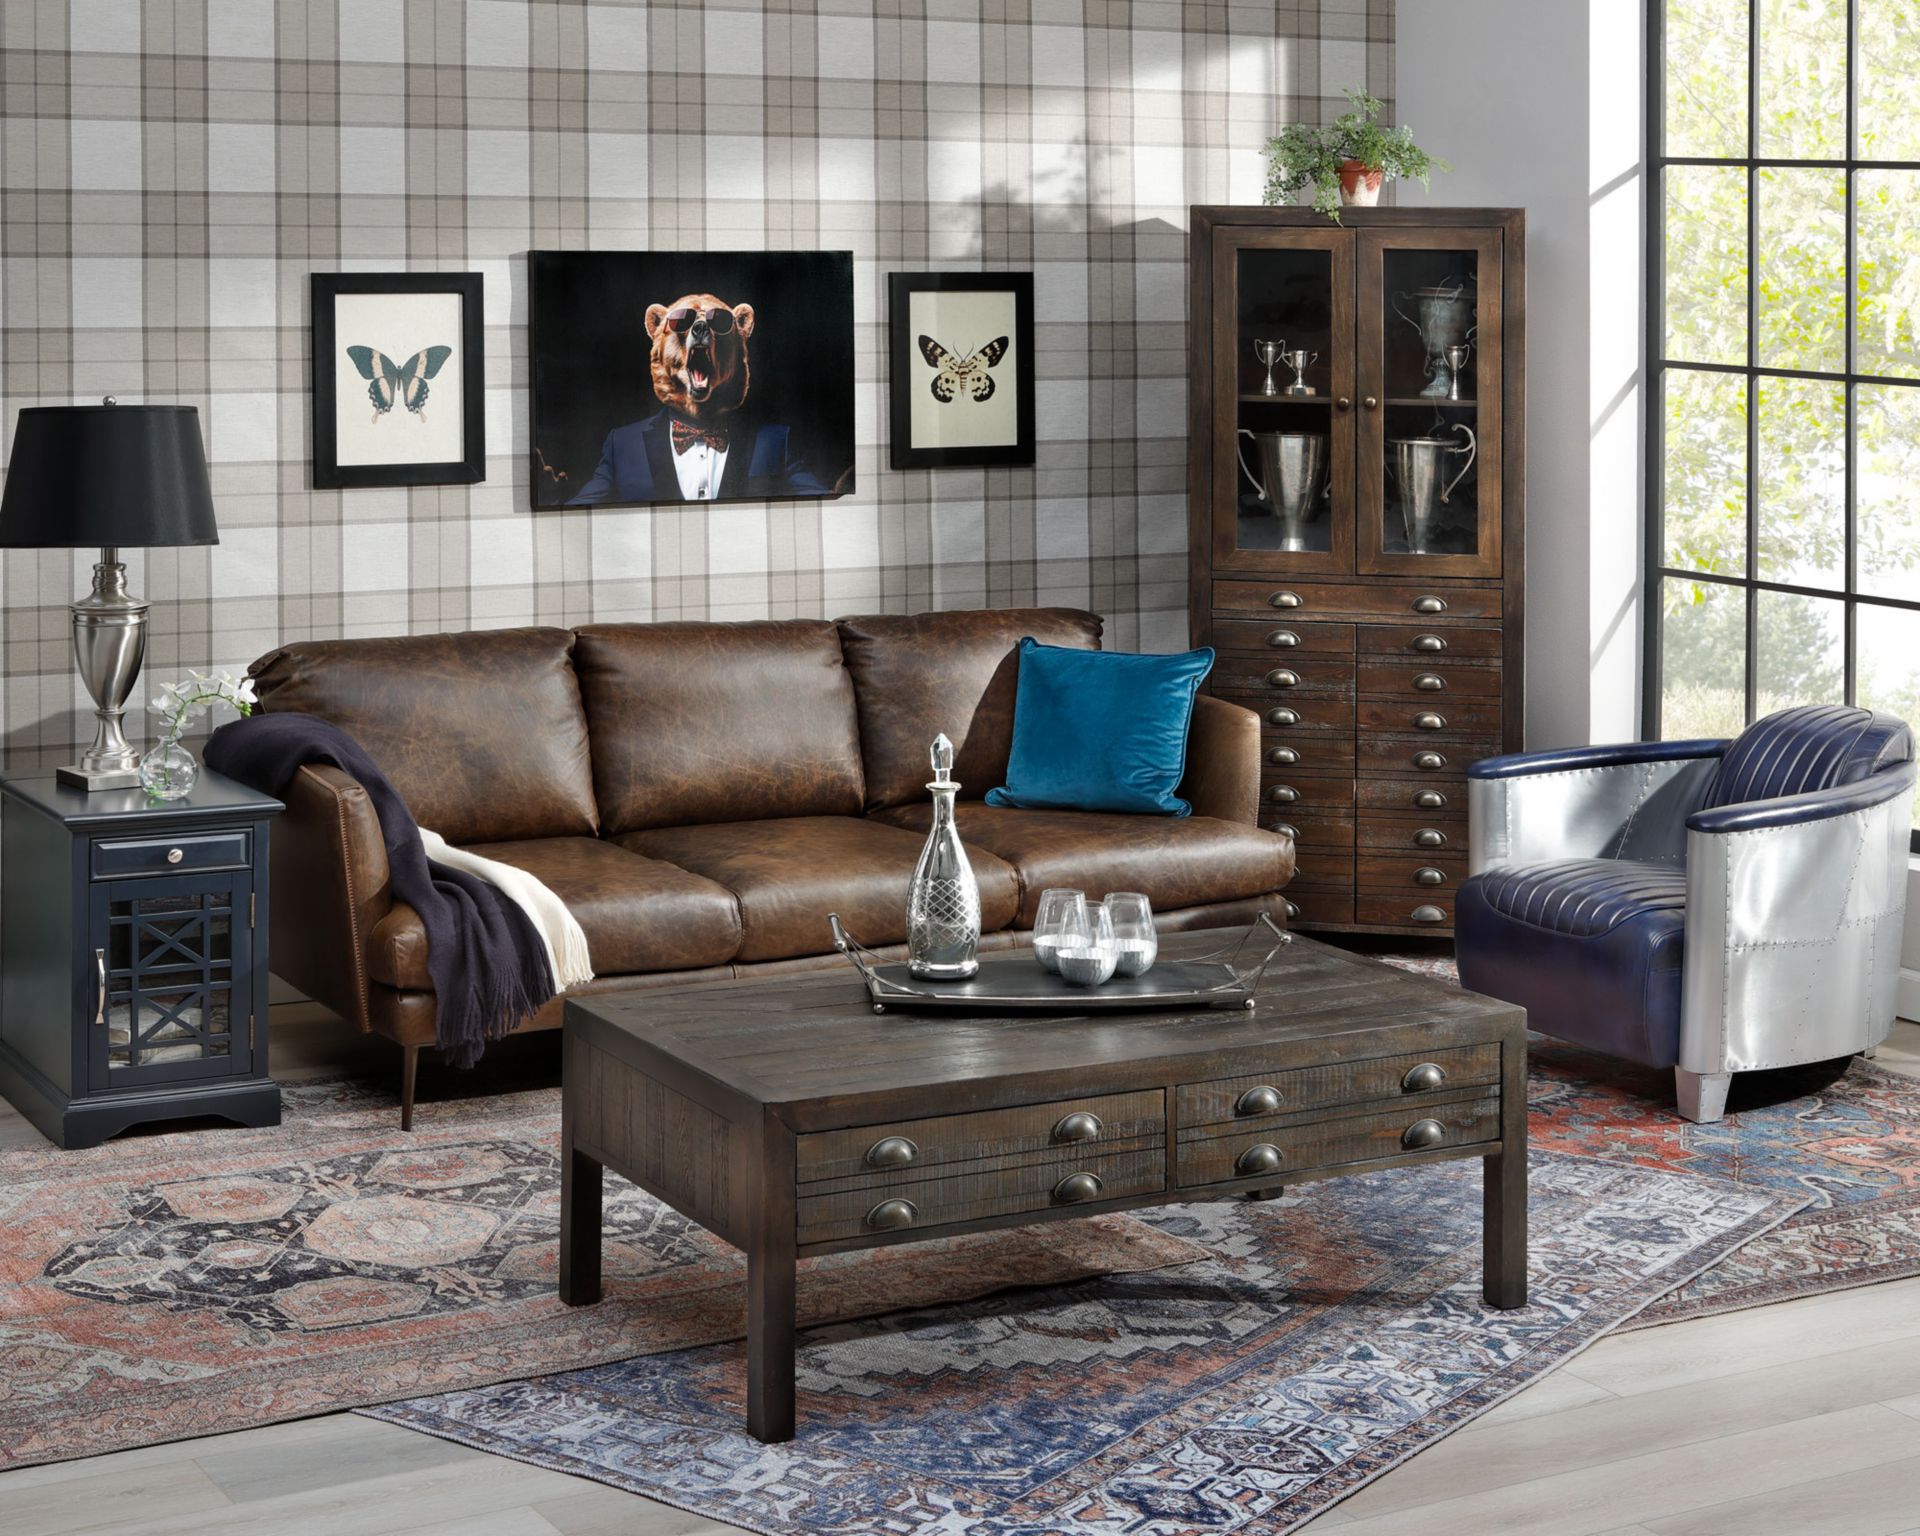 Brown Leather Sofa with navy windowed side table and apothecary style shelves and coffee table. 